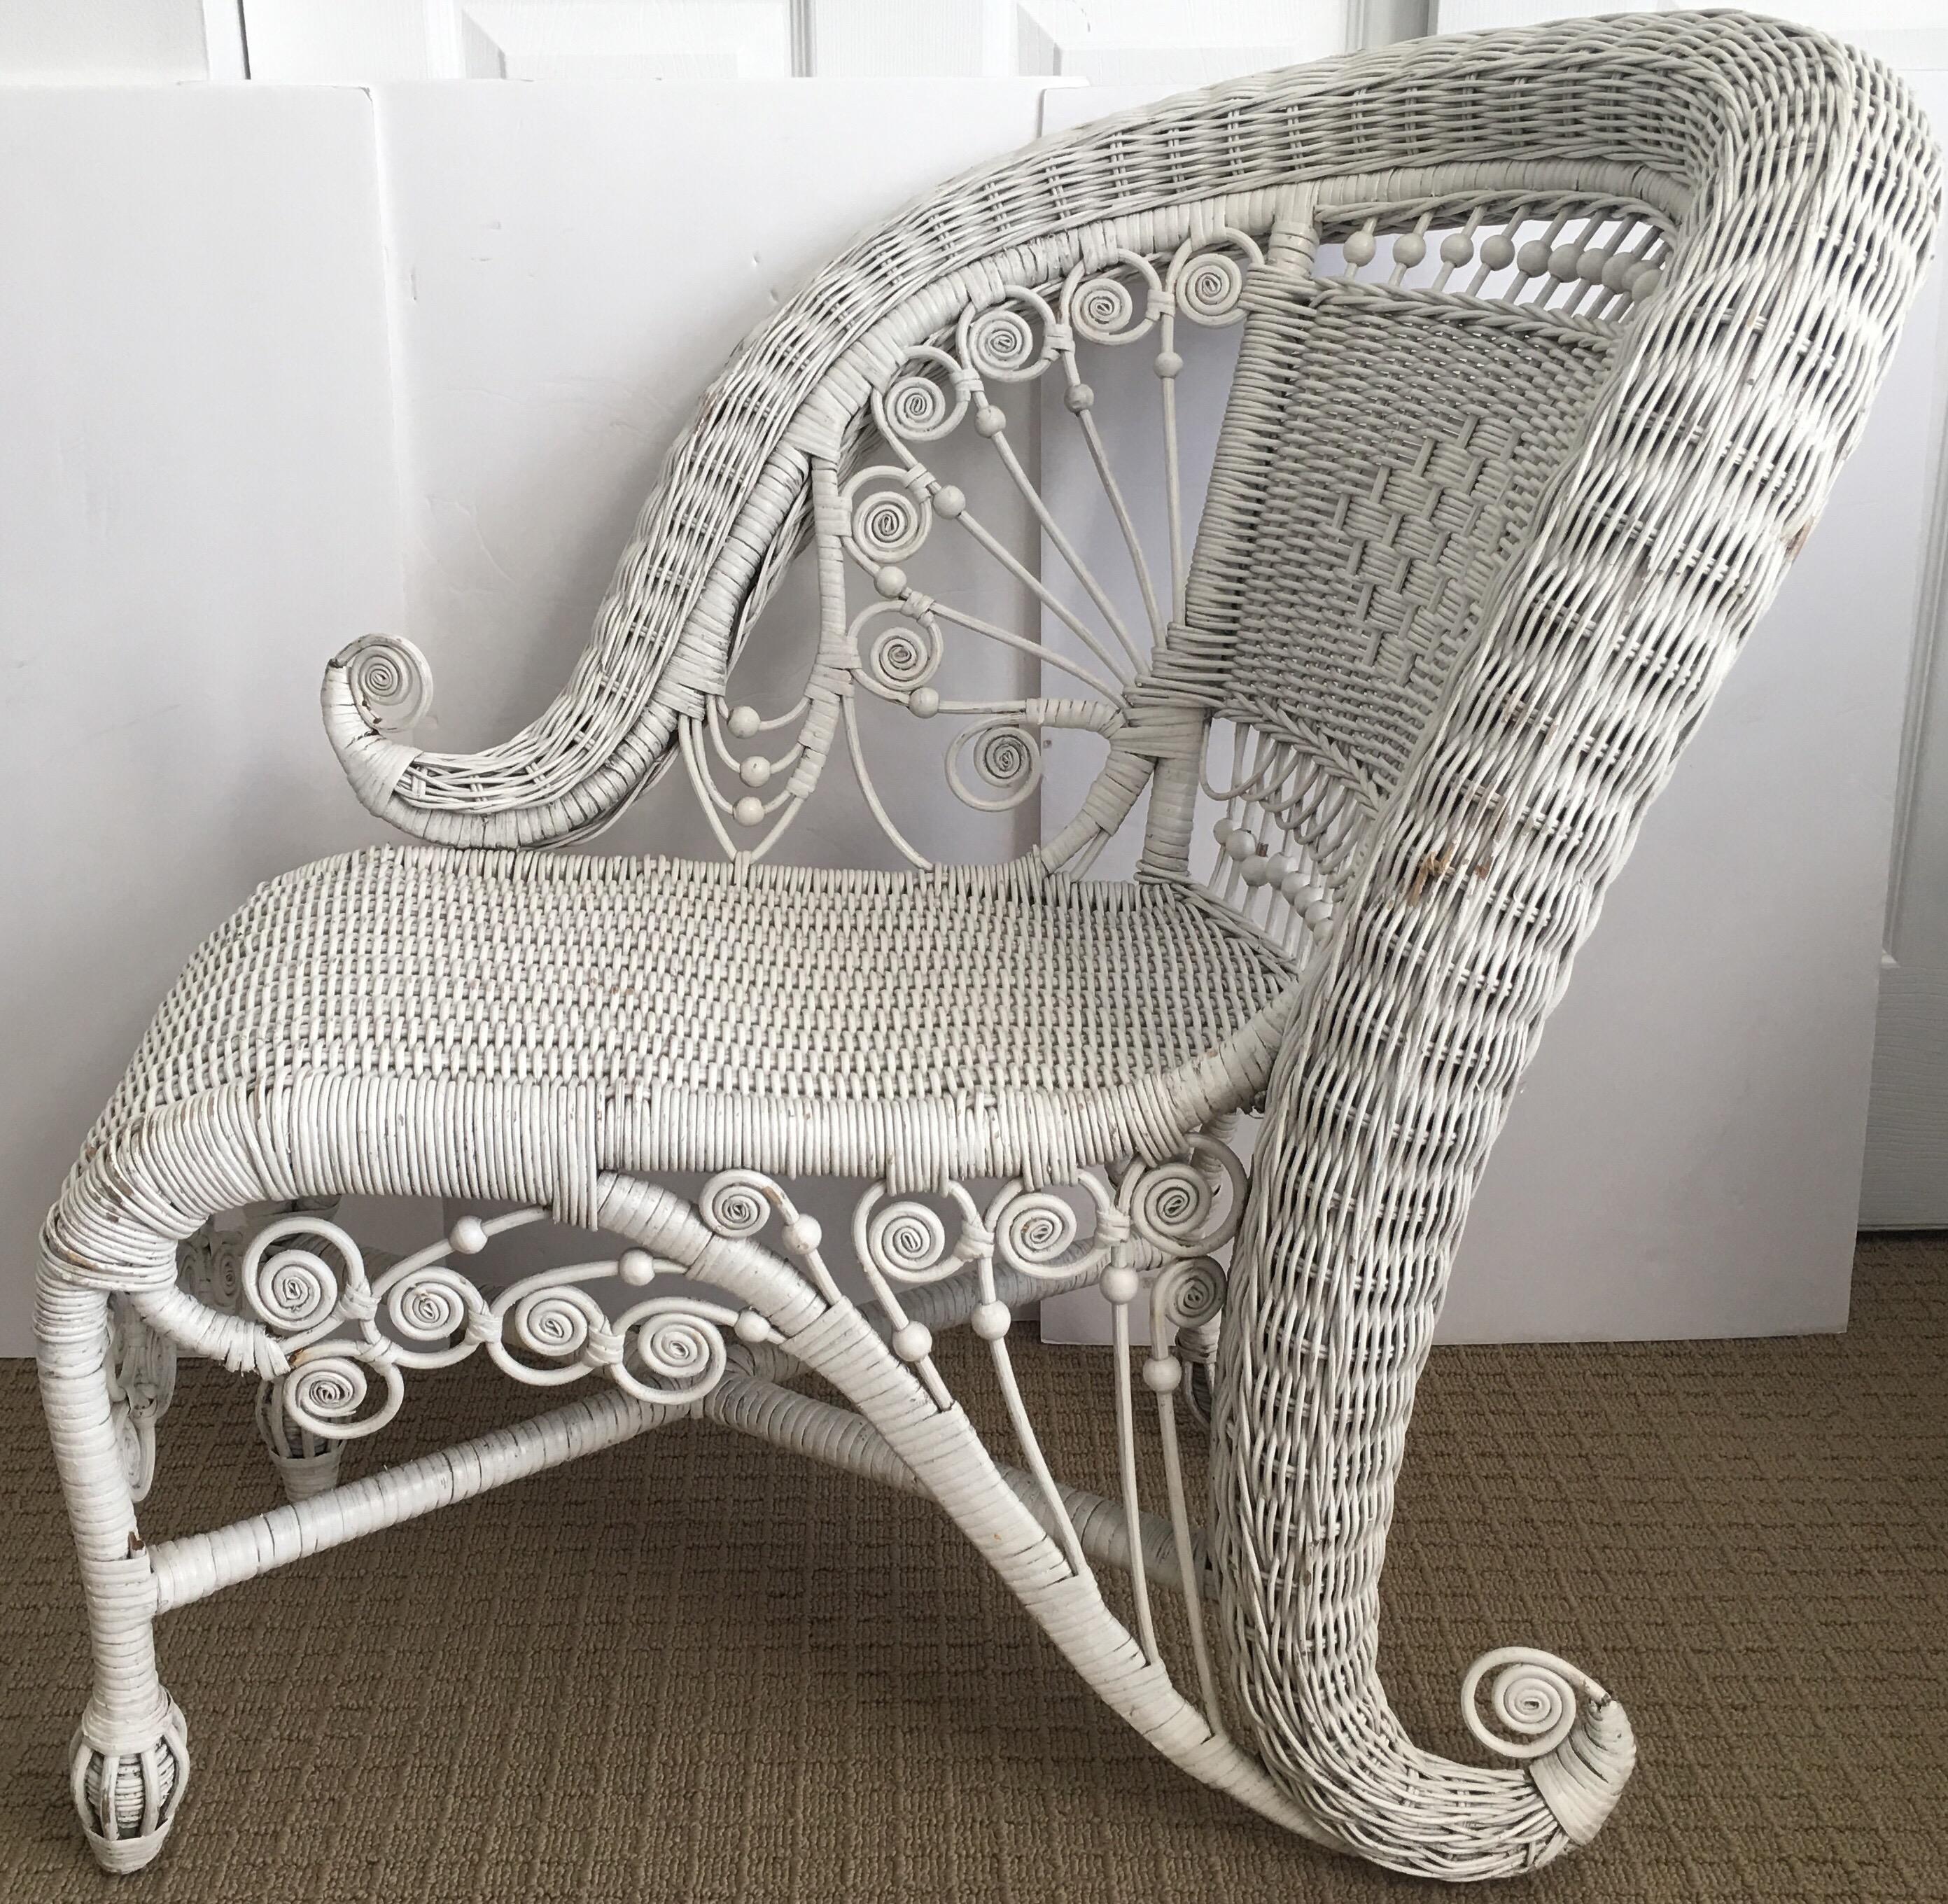 Victorian style white one-arm wicker portrait chair. This unique and sculptural lounging chair is the perfect accent piece for any space including a bedroom, living room or even in a large bathroom or walk-in closet. This chaise lounge style chair